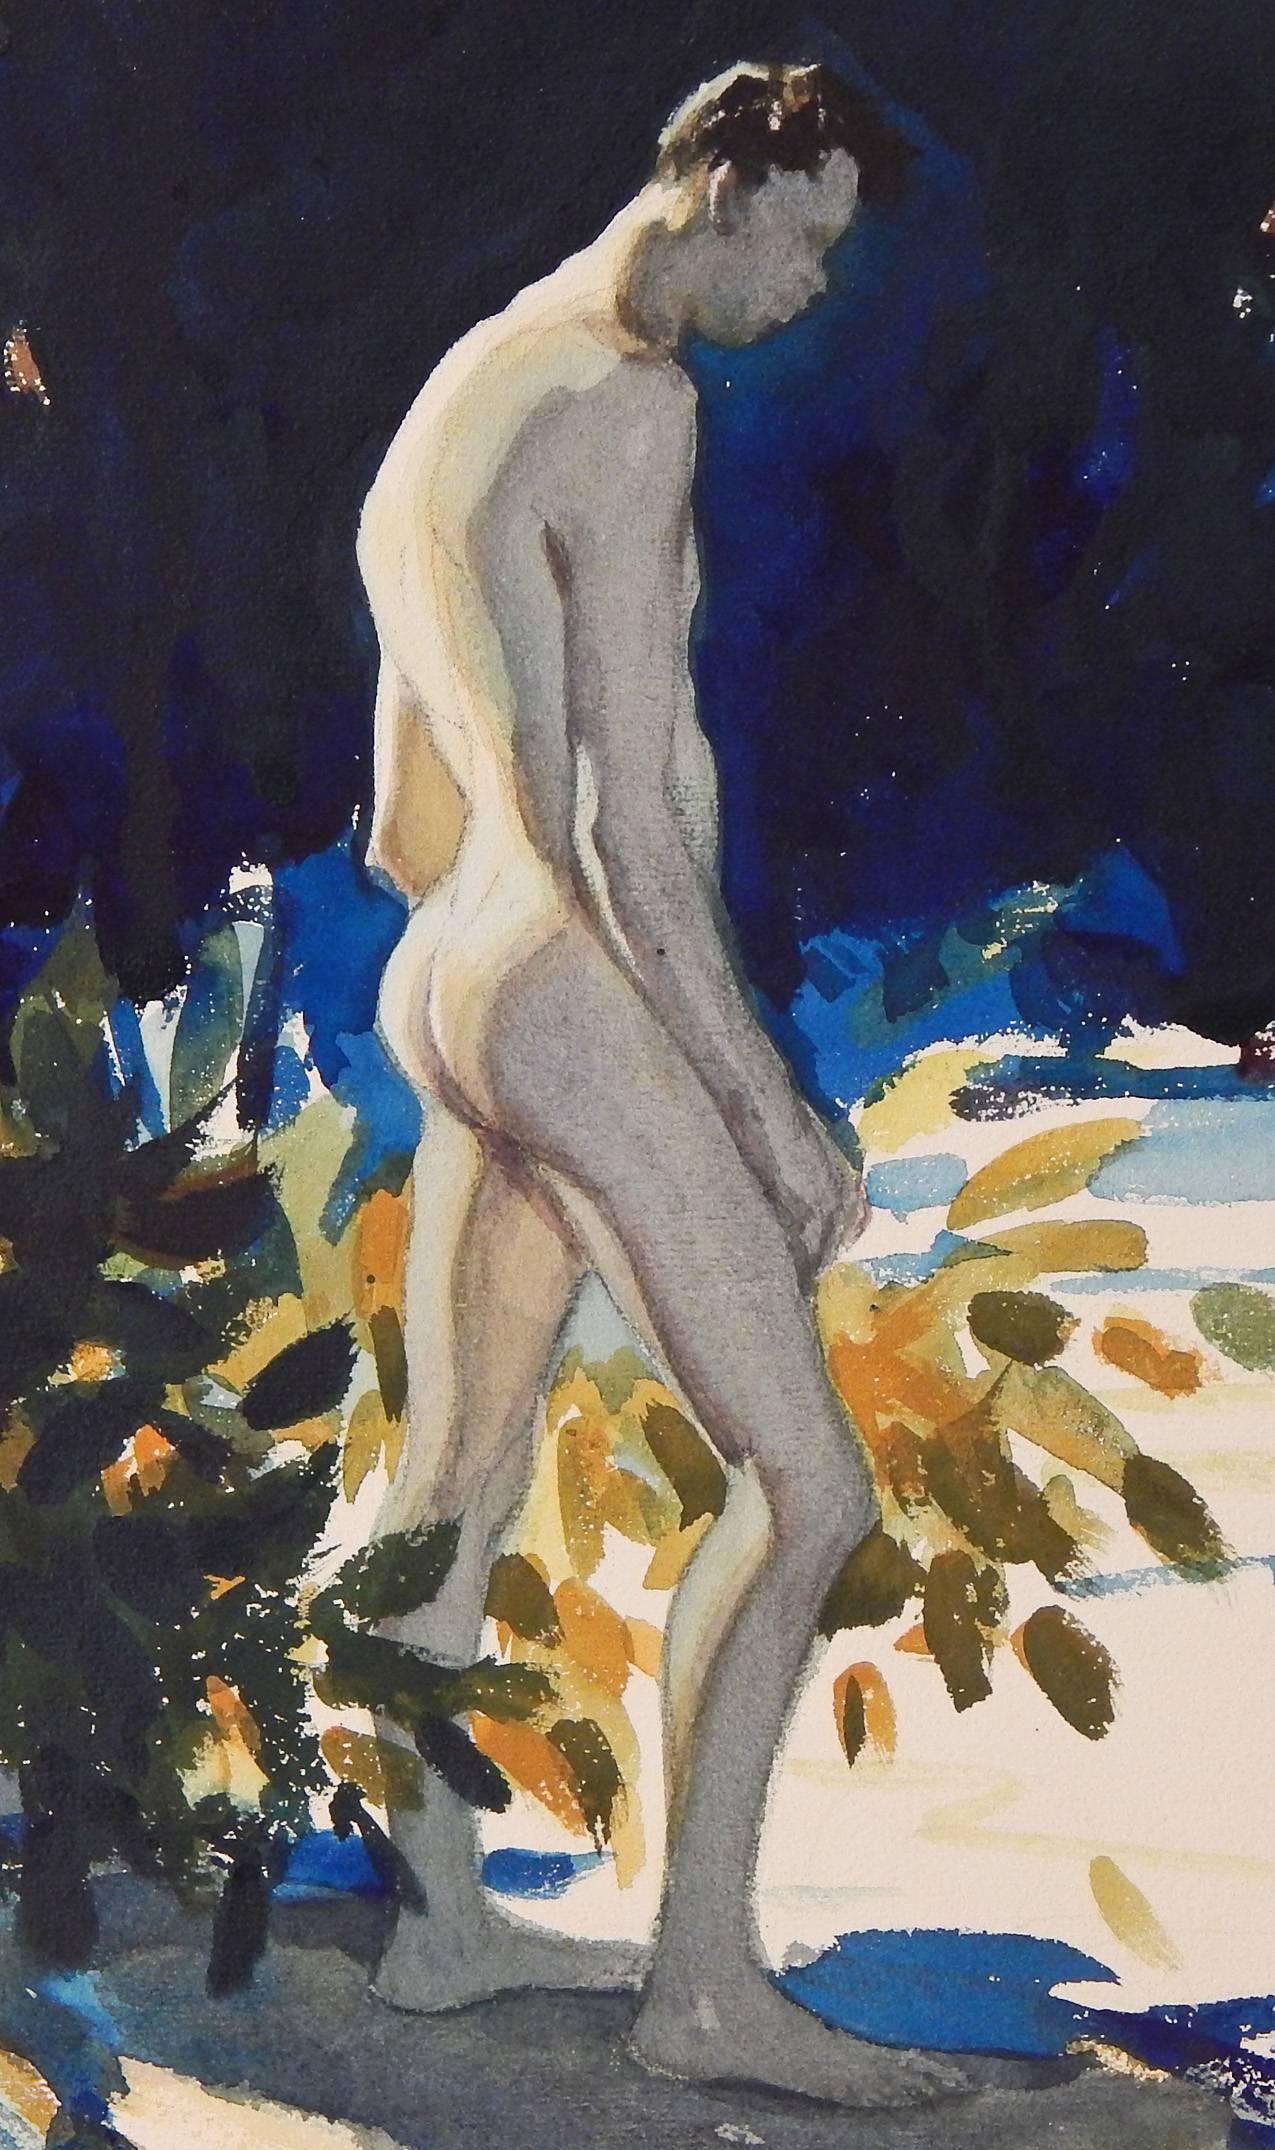 Painted by Wilmot Heitland, one of America's great watercolorists in the 1930s, this sun-drenched depiction of a native Dominican, nude and stepping toward a pool of water, captures the lush tropical locale with great color and texture. The bright